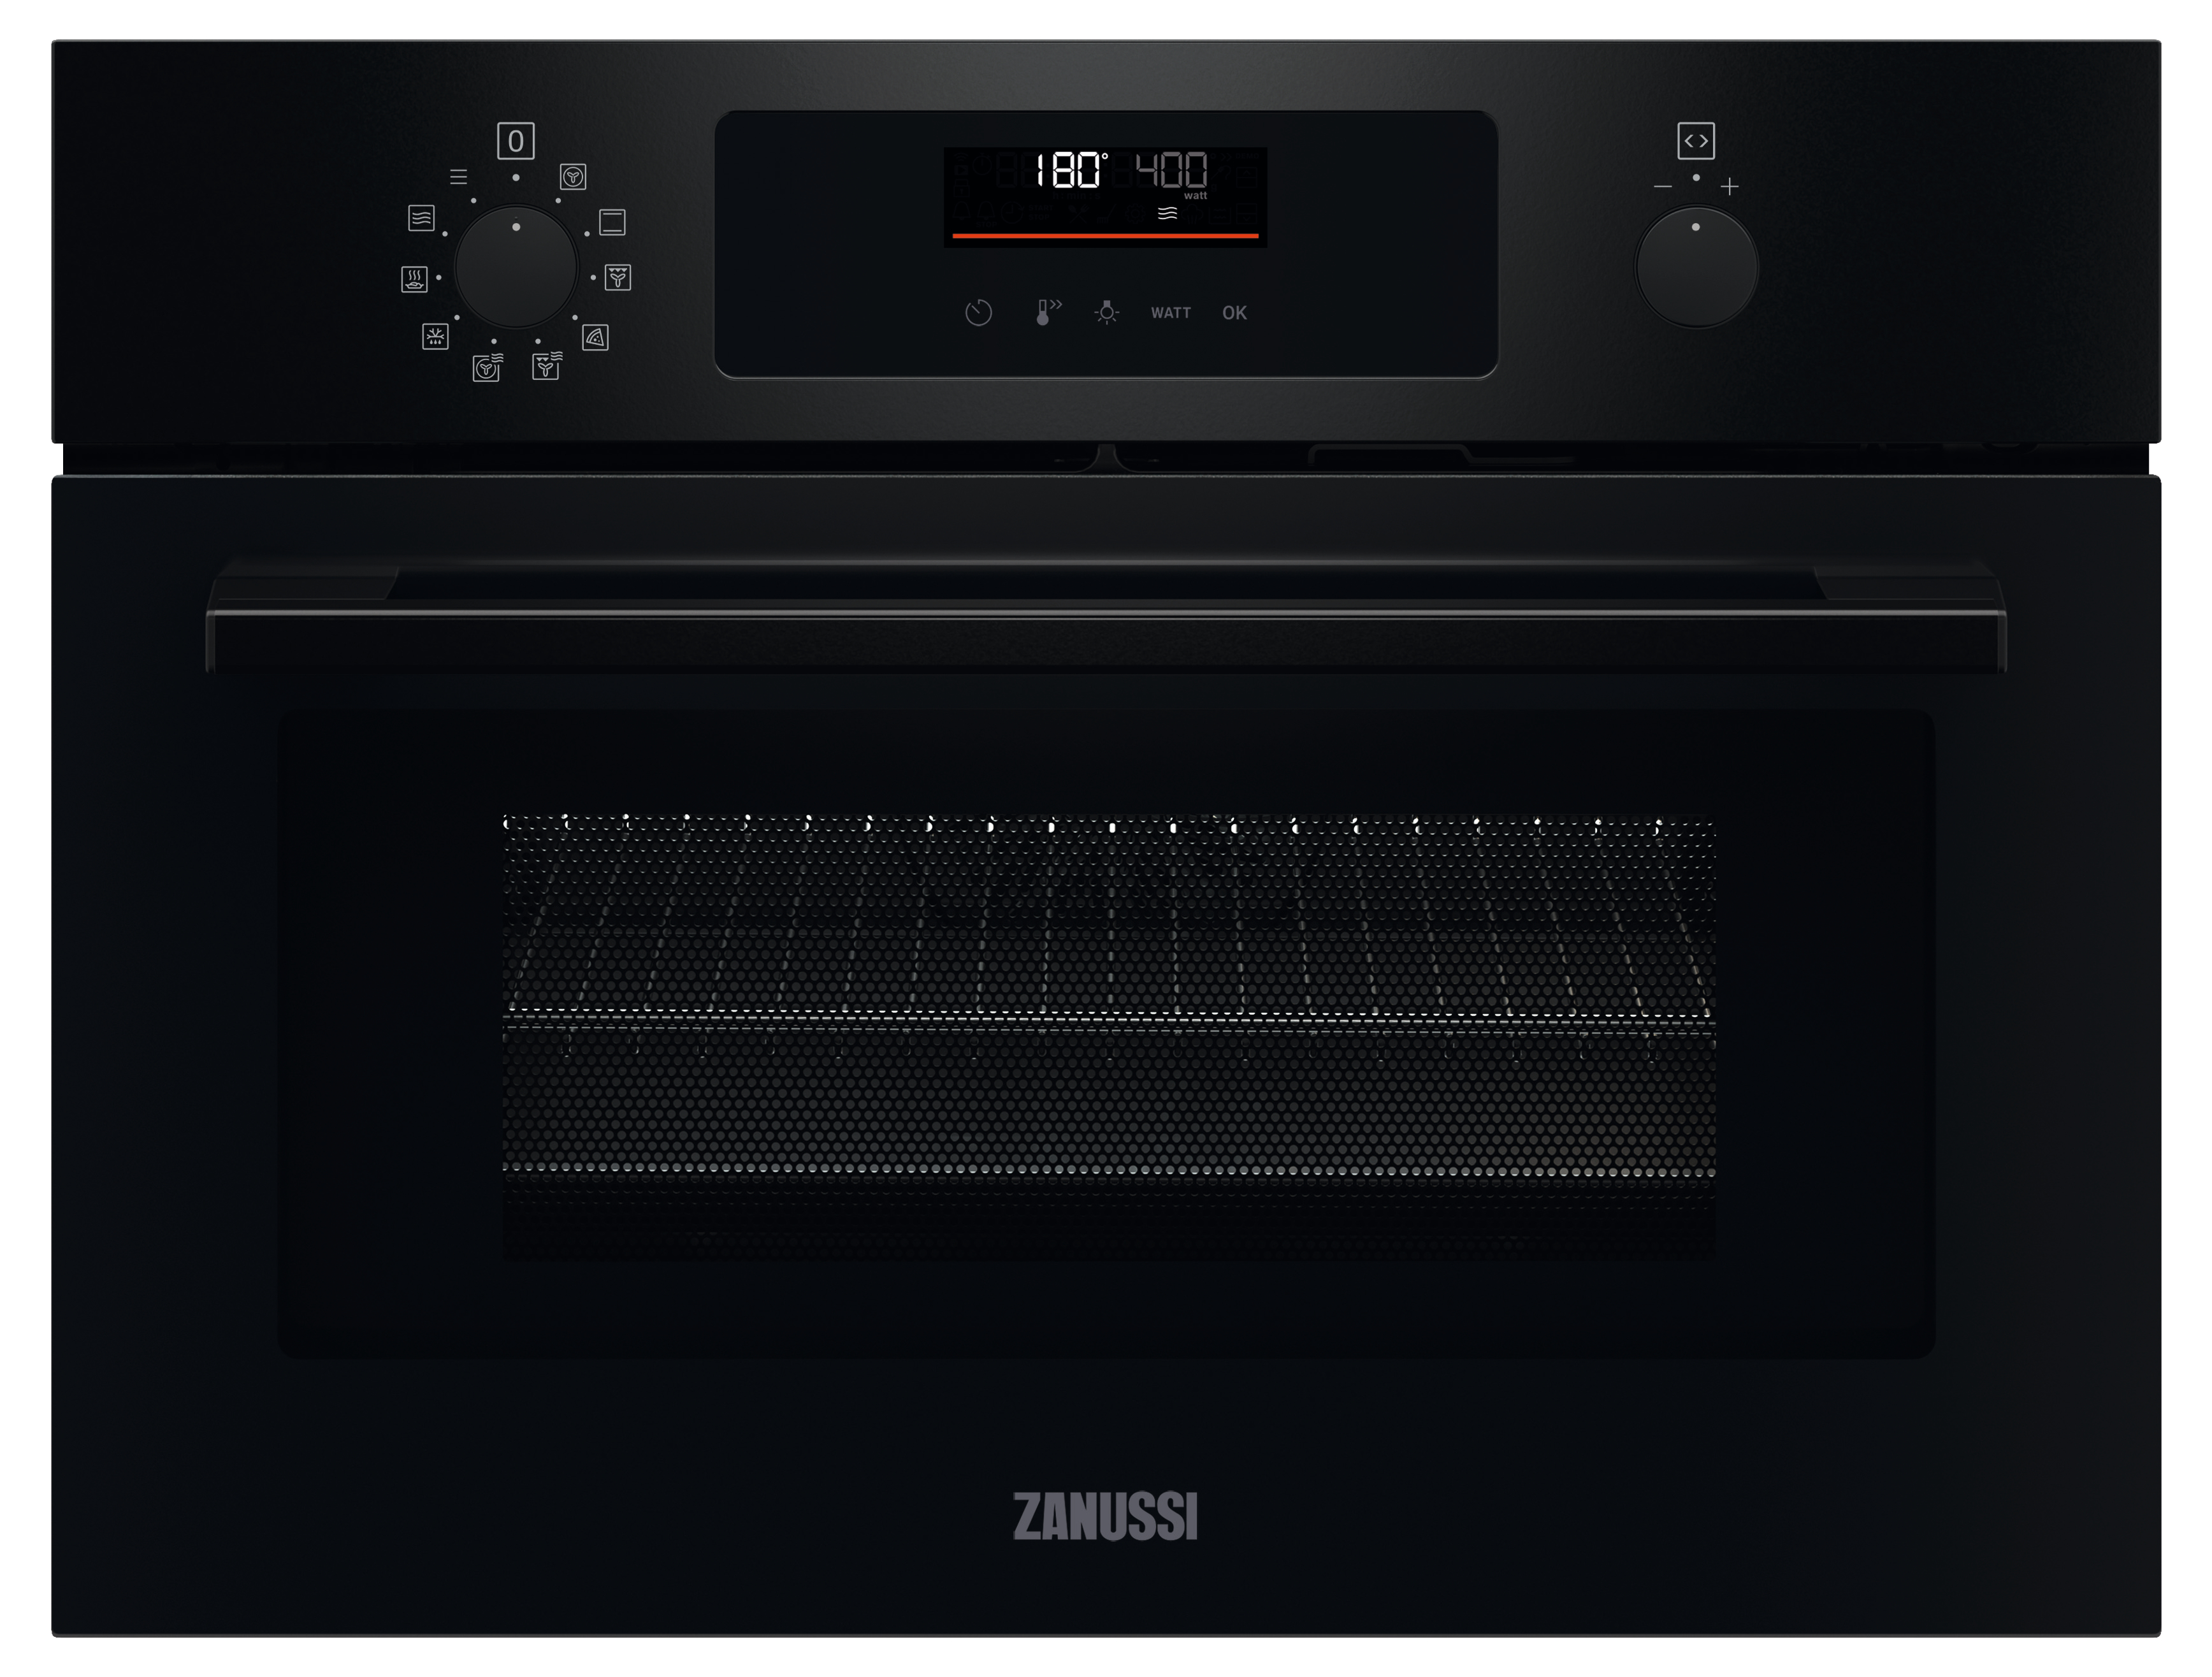 Zanussi ZVENM6KN Compact Oven with Microwave - Black